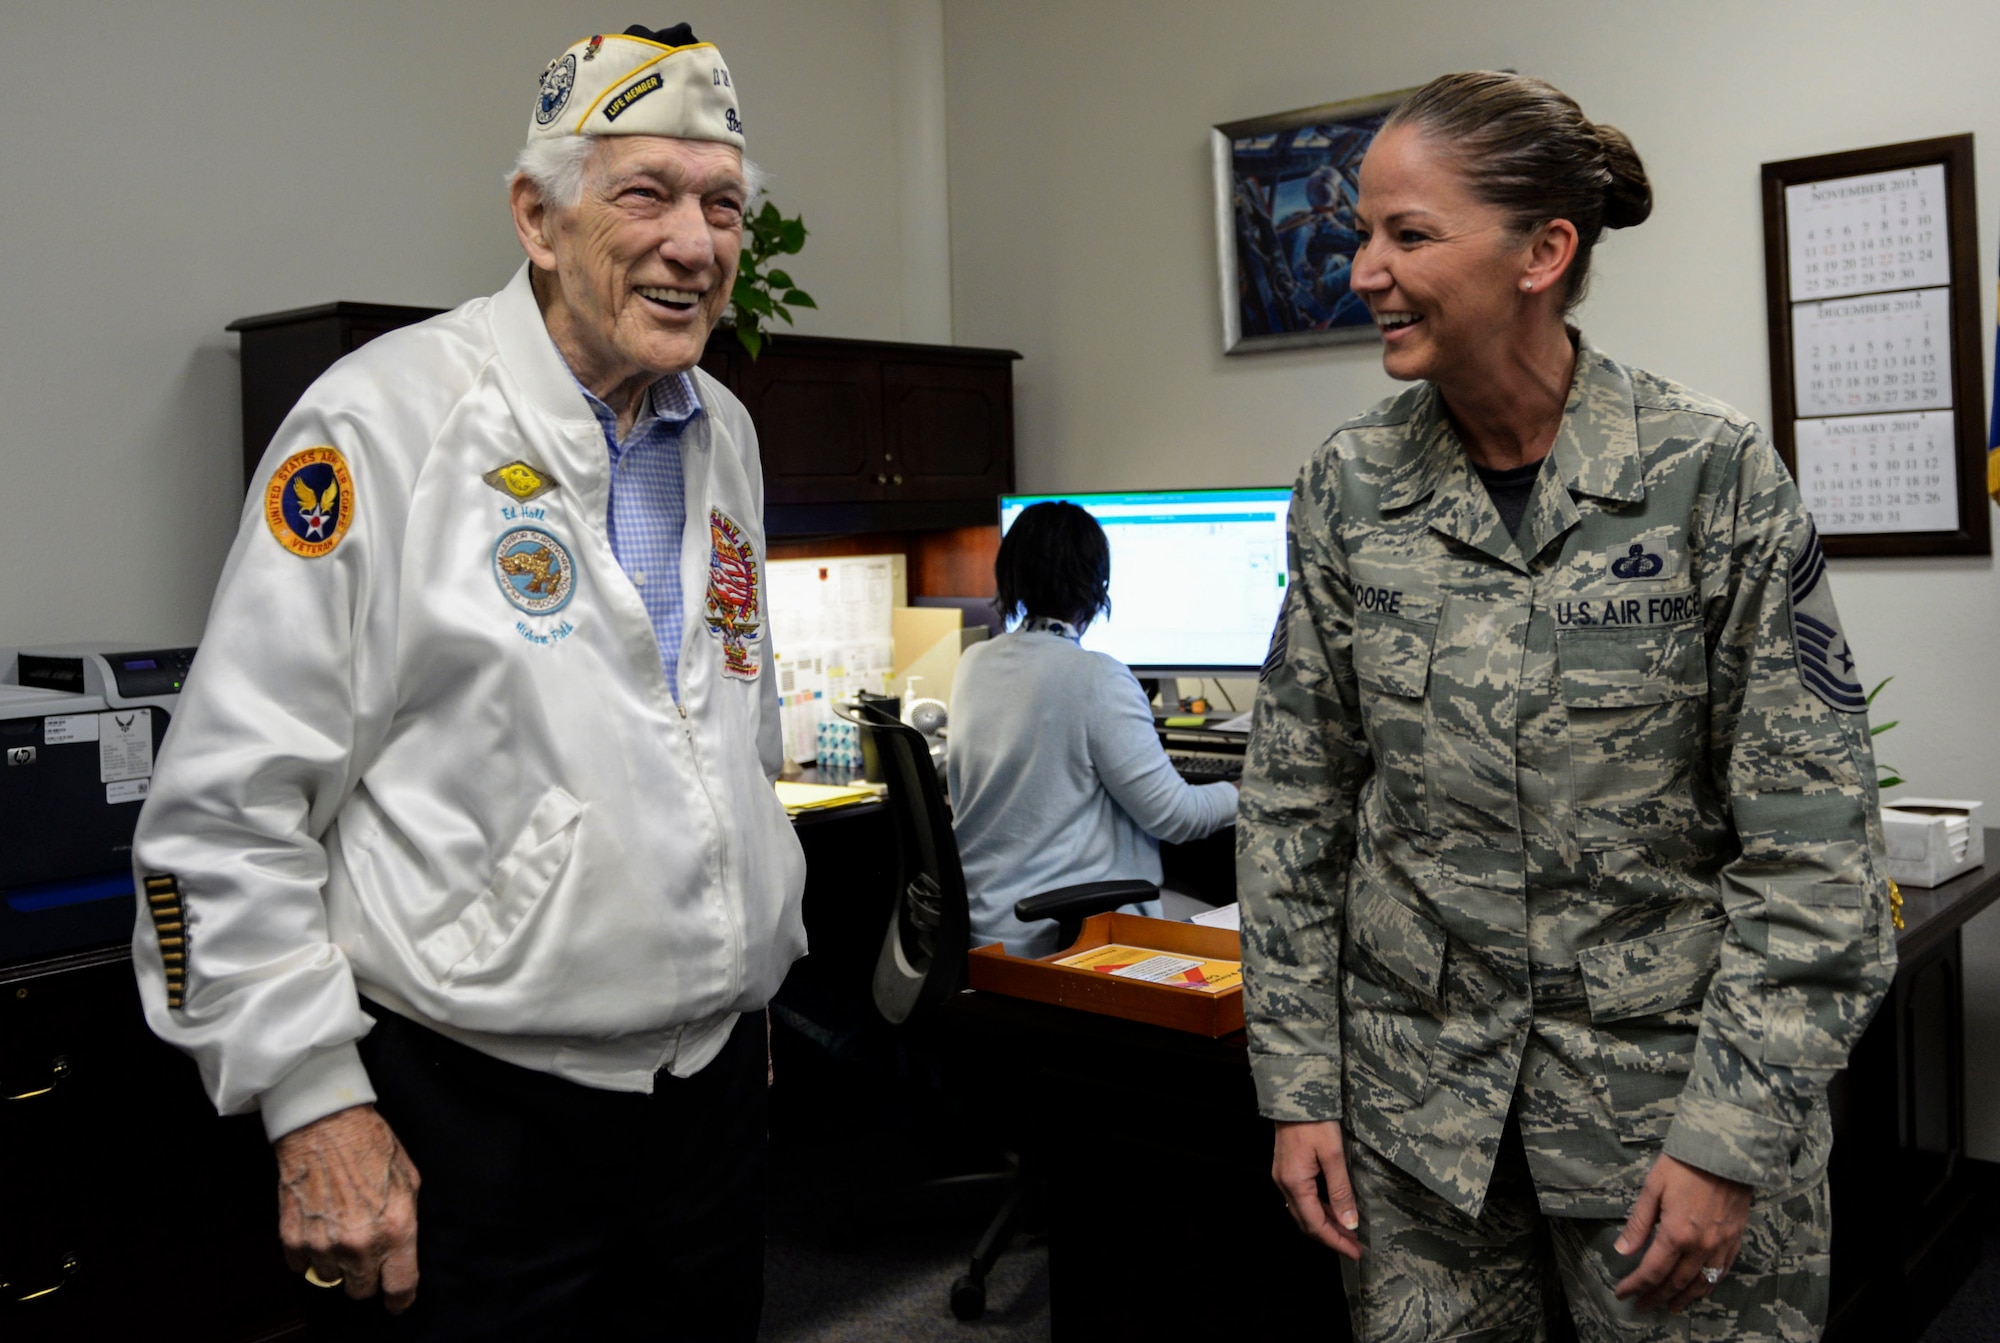 Ed Hall, Pearl Harbor Survivor, laughs with Chief Master Sgt. Tammy Moore, 99th Comptroller Squadron Superintendent, Dec. 7, 2018 on Nellis Air Force Base, Nevada. Hall stopped by the 99th Air Base Wing headquarters to meet with 99th ABW leadership. (U.S. Air Force photo by Airman 1st Class Bailee A. Darbasie)